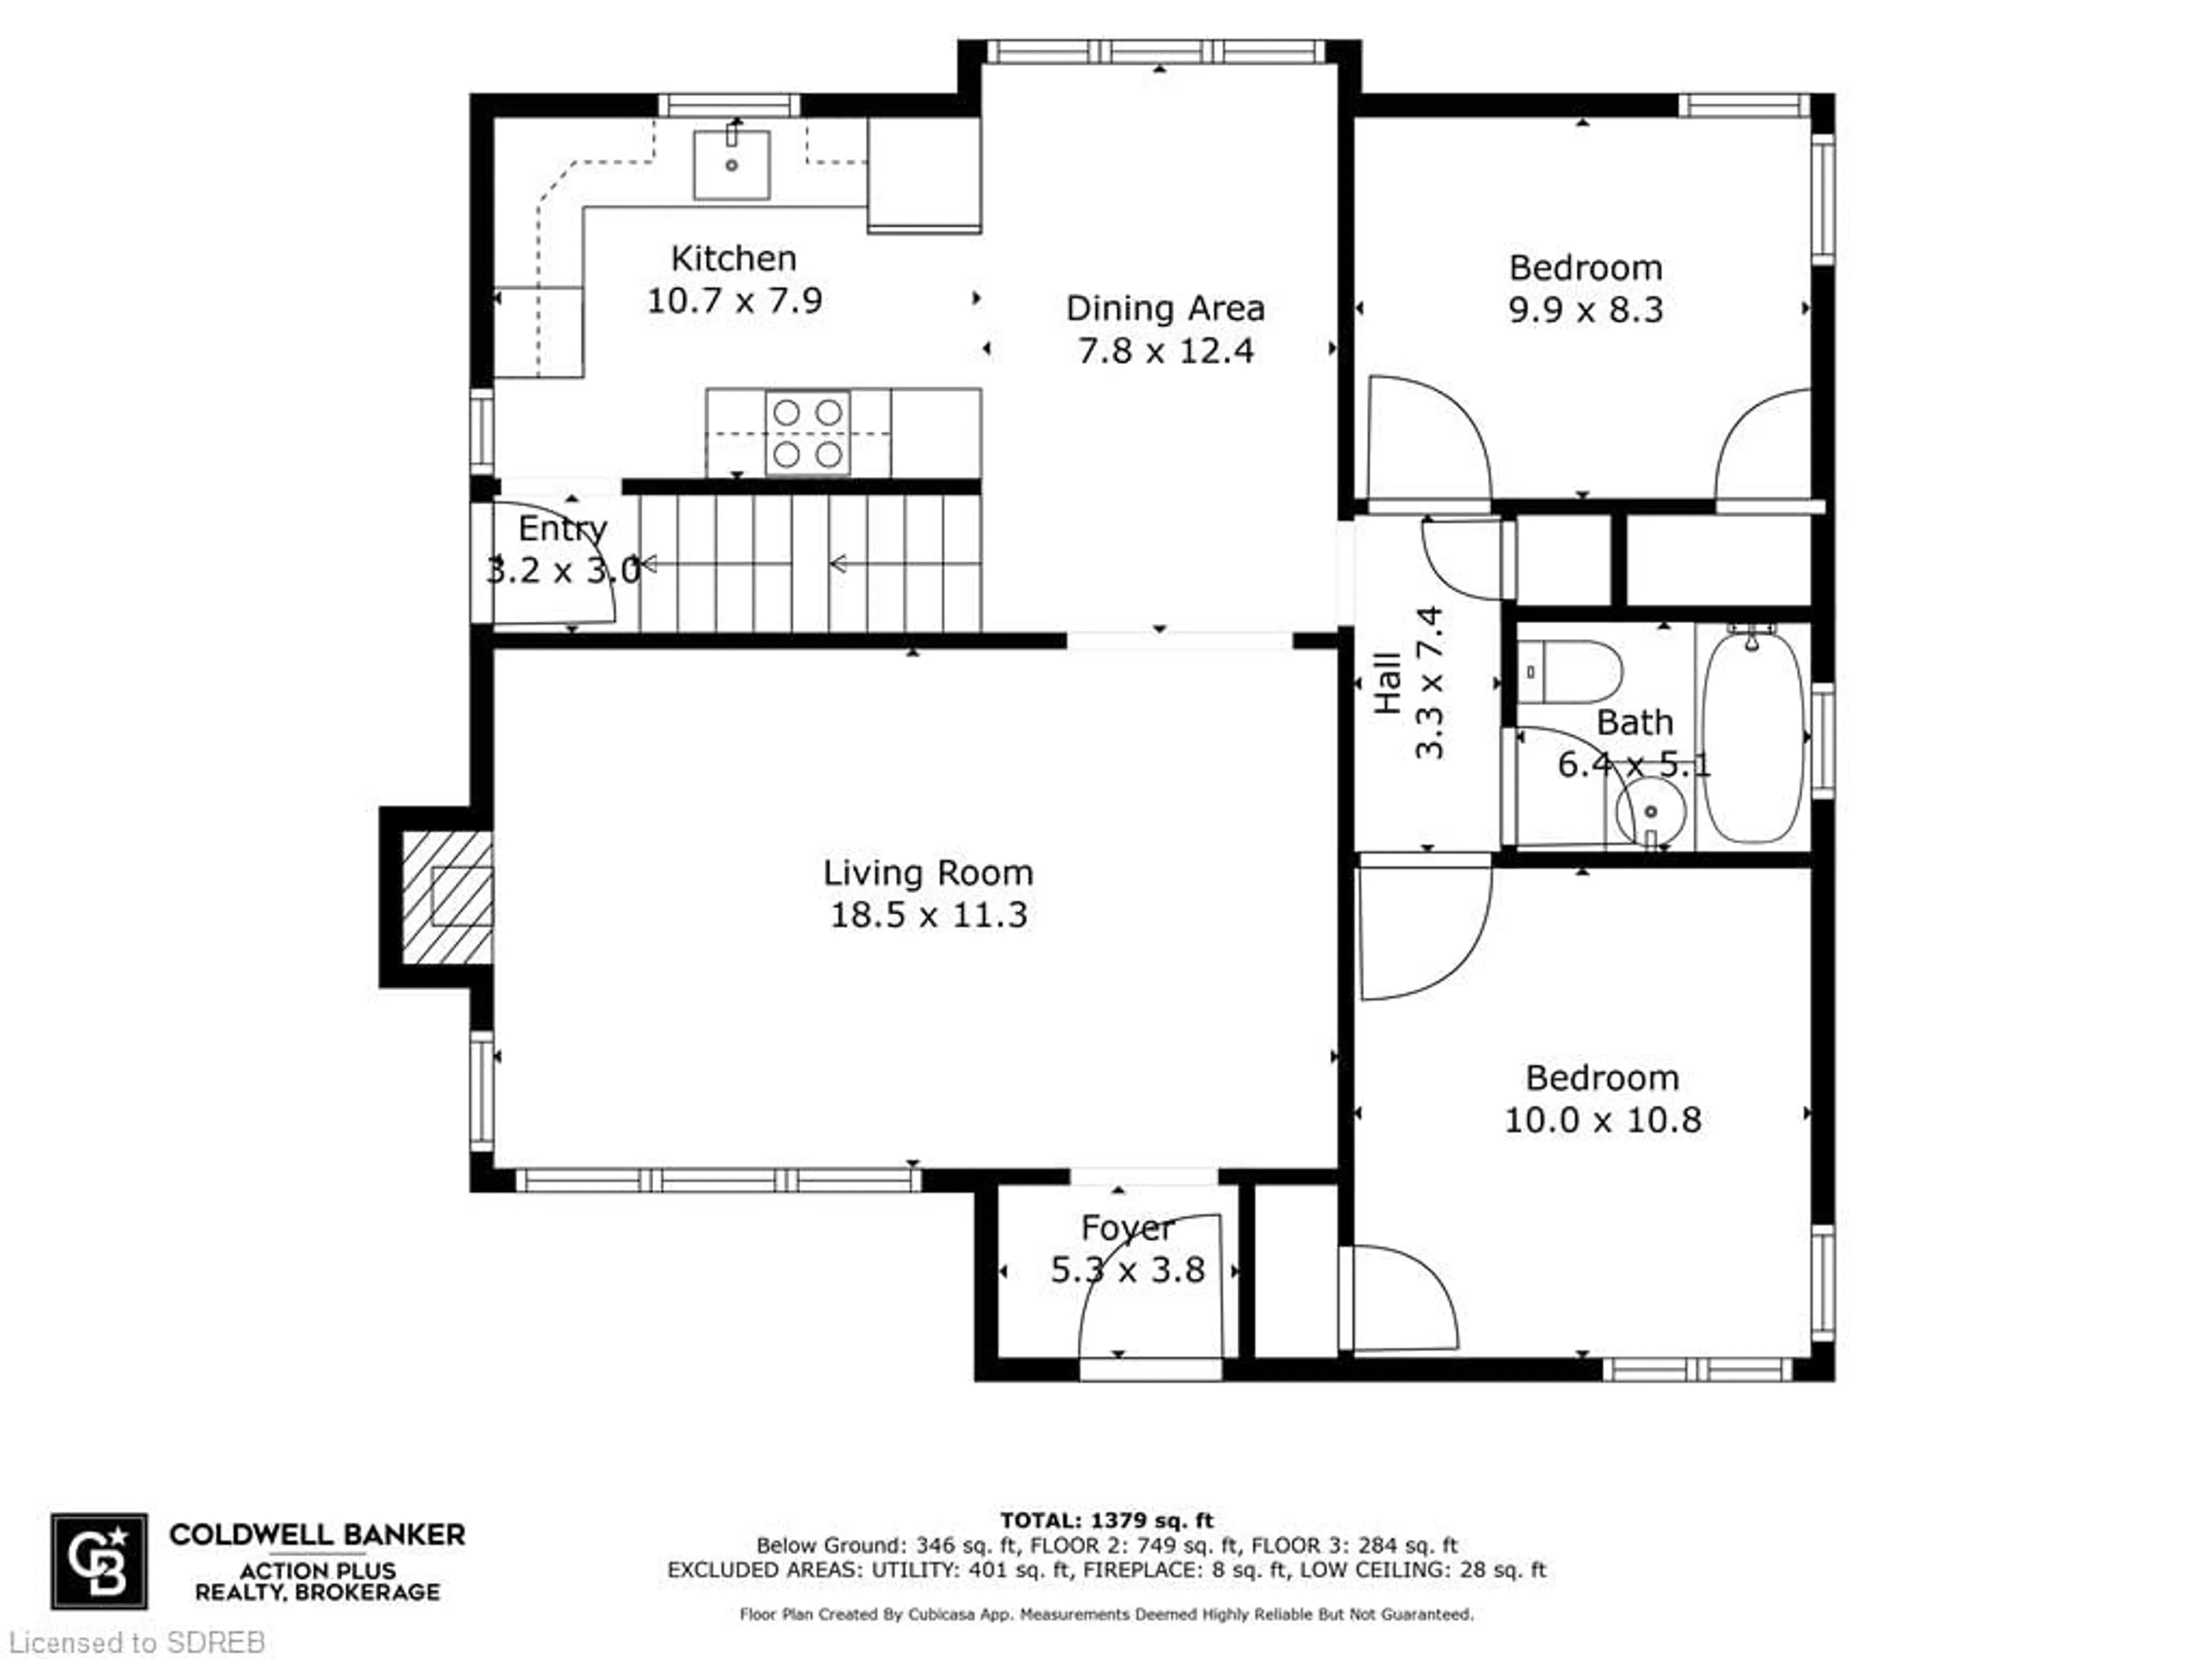 Floor plan for 158 St James St, Waterford Ontario N0E 1Y0